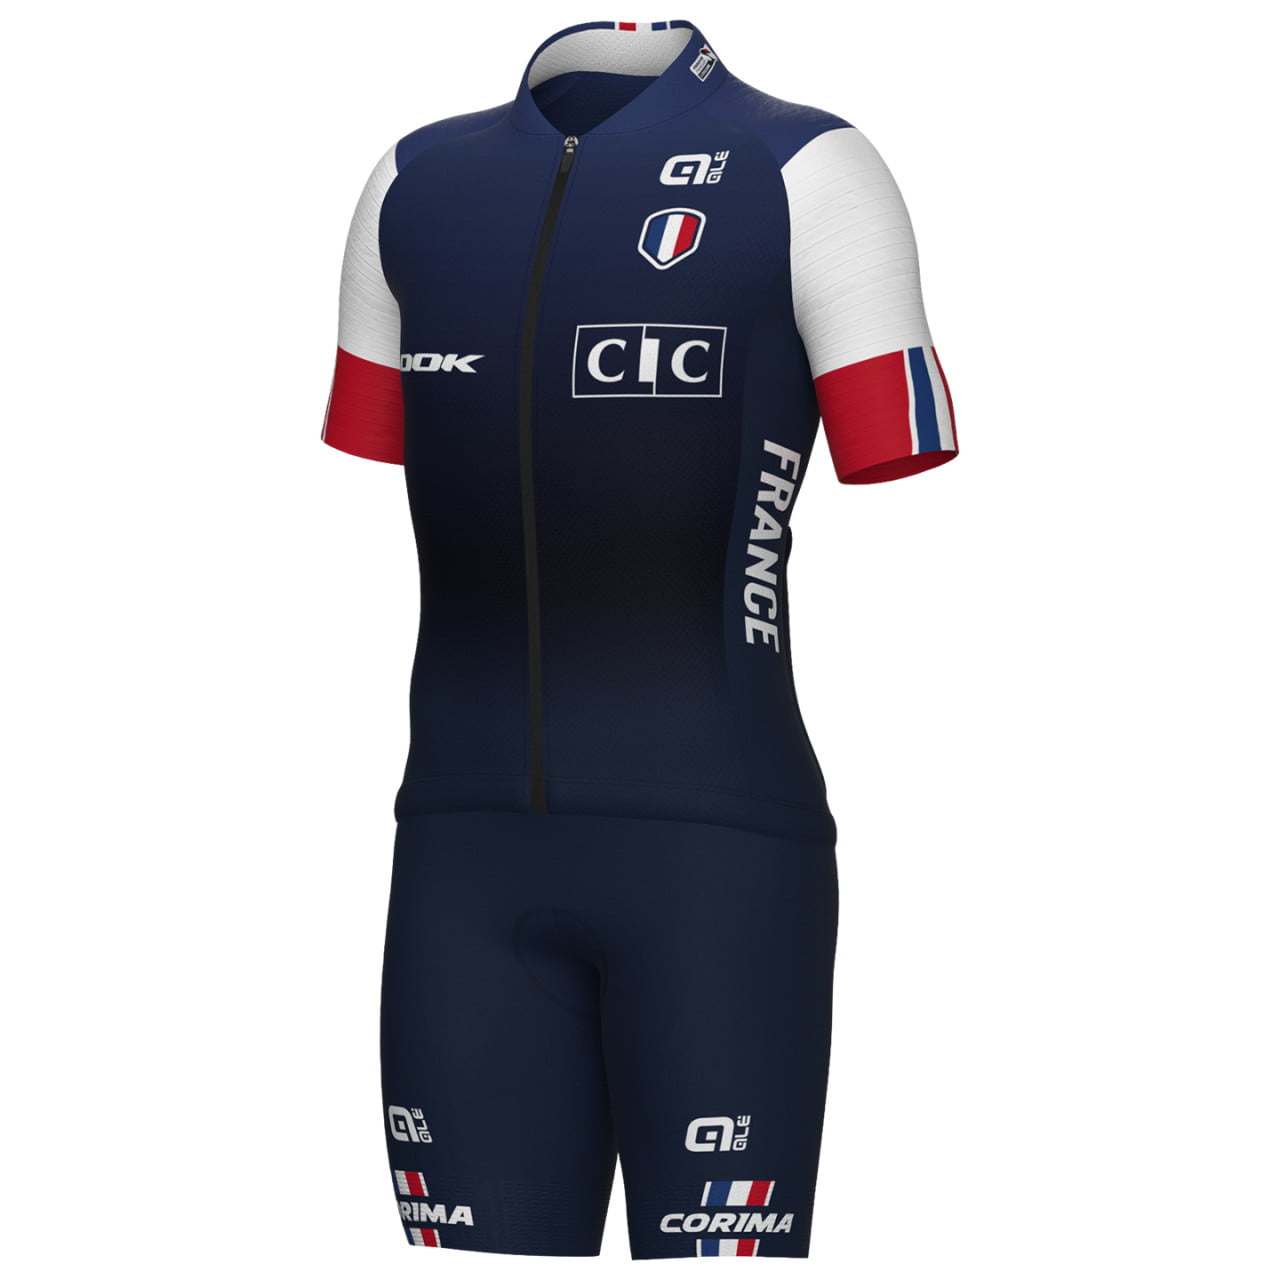 FRENCH NATIONAL TEAM 2023 Children's Kit (2 pieces)